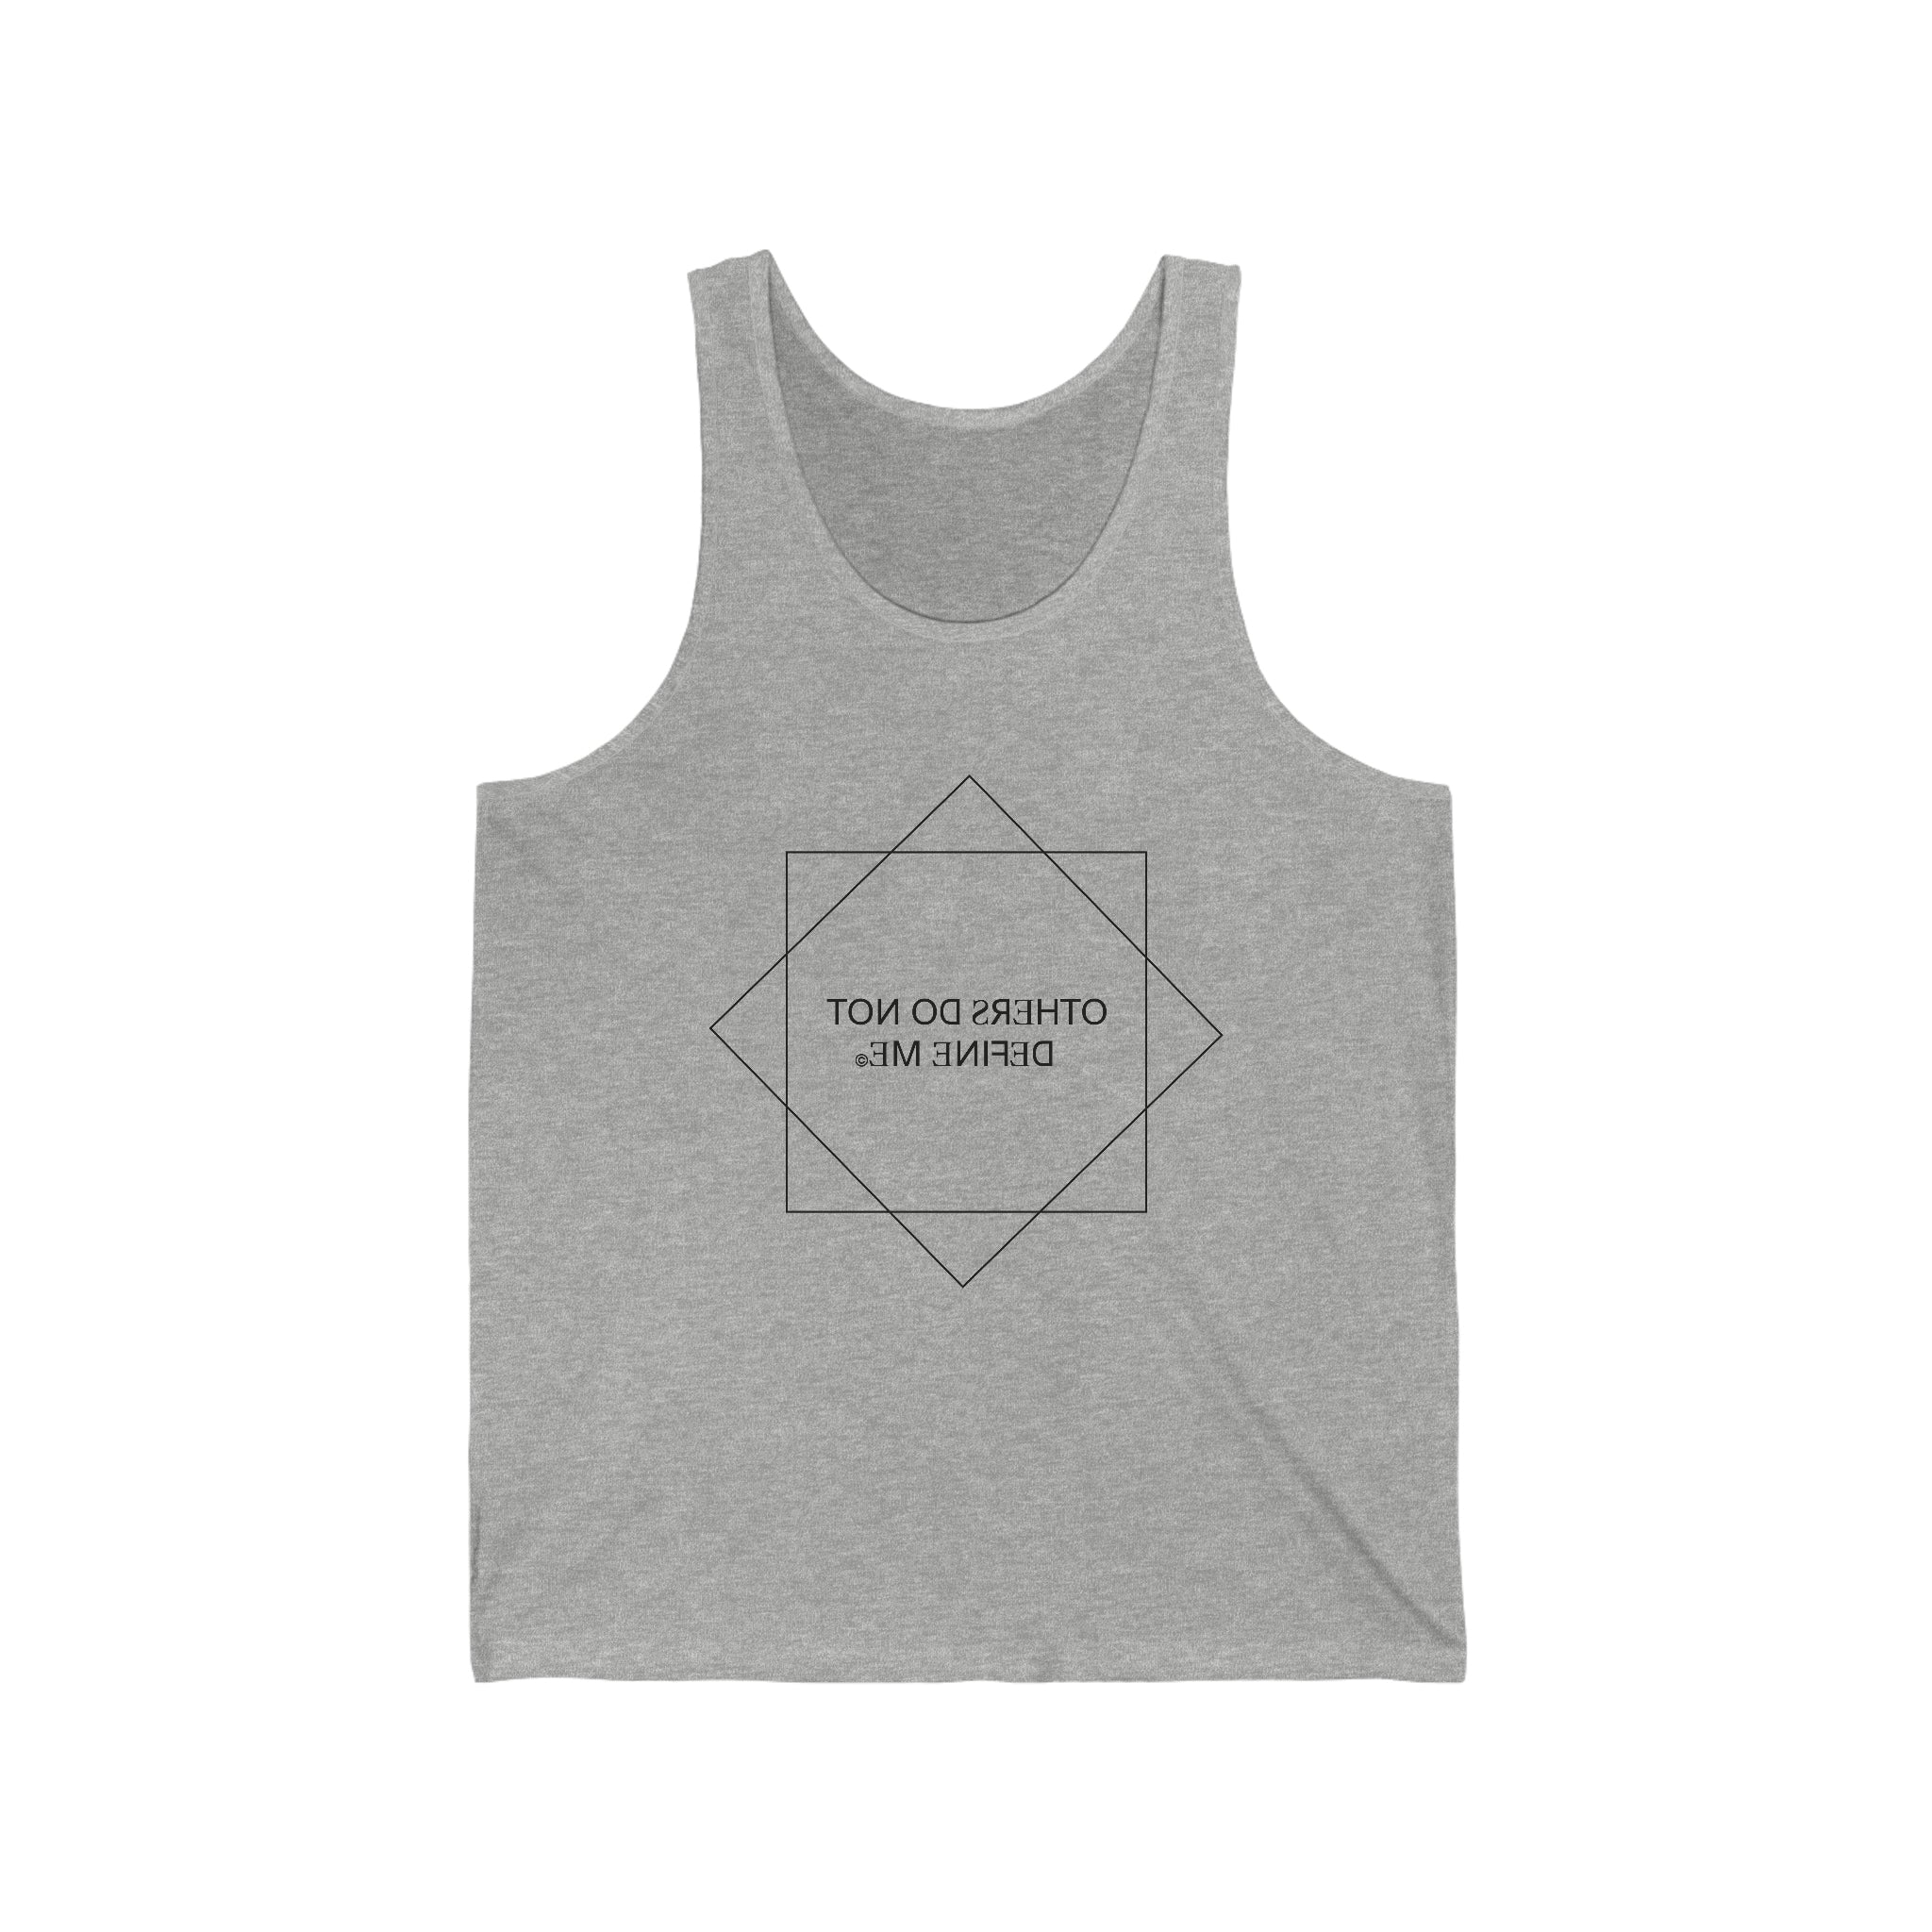 "Others Do Not Define Me" Men's Tank